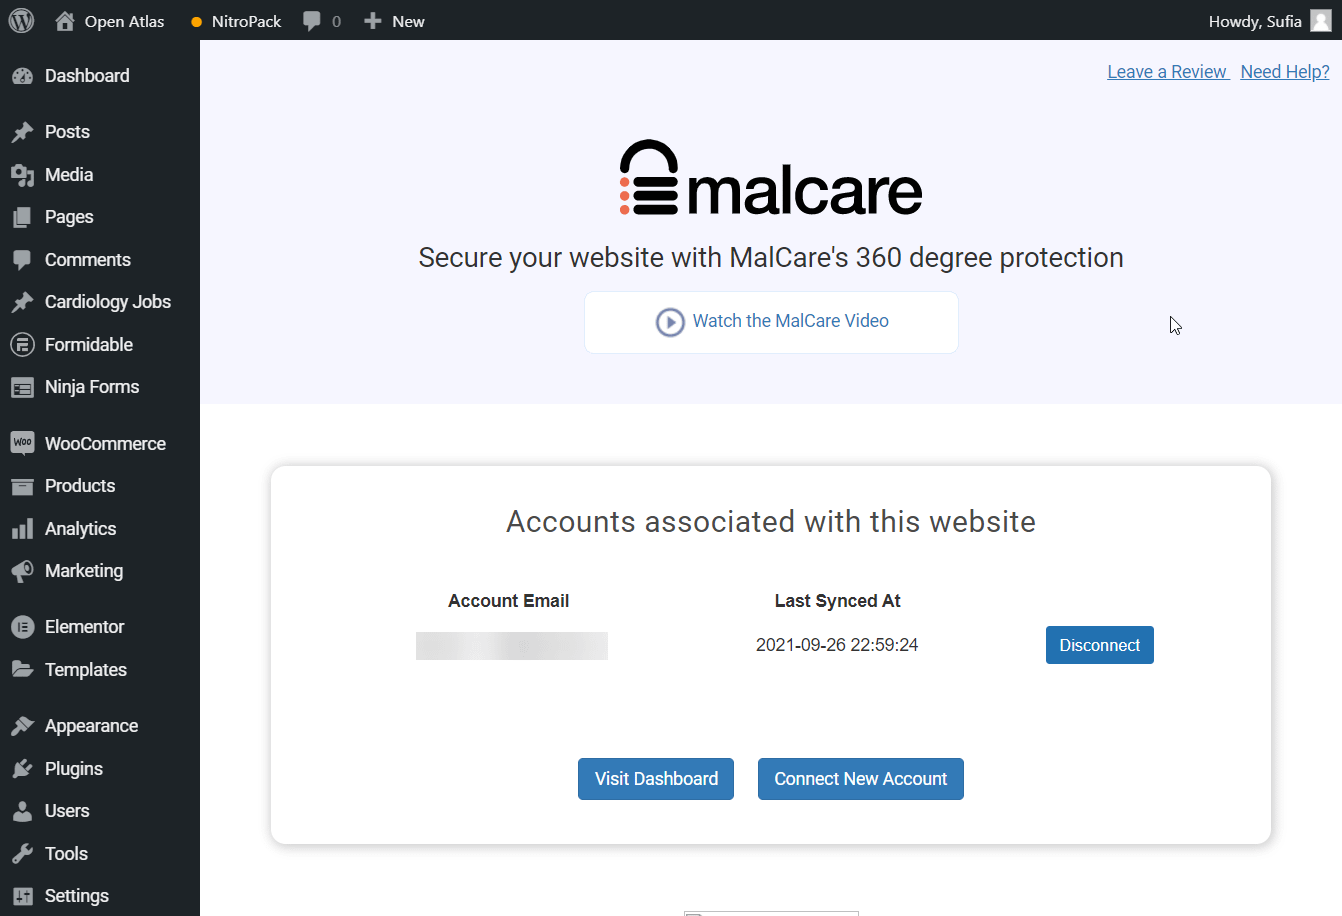 deceptive site ahead warning - fix with MalCare